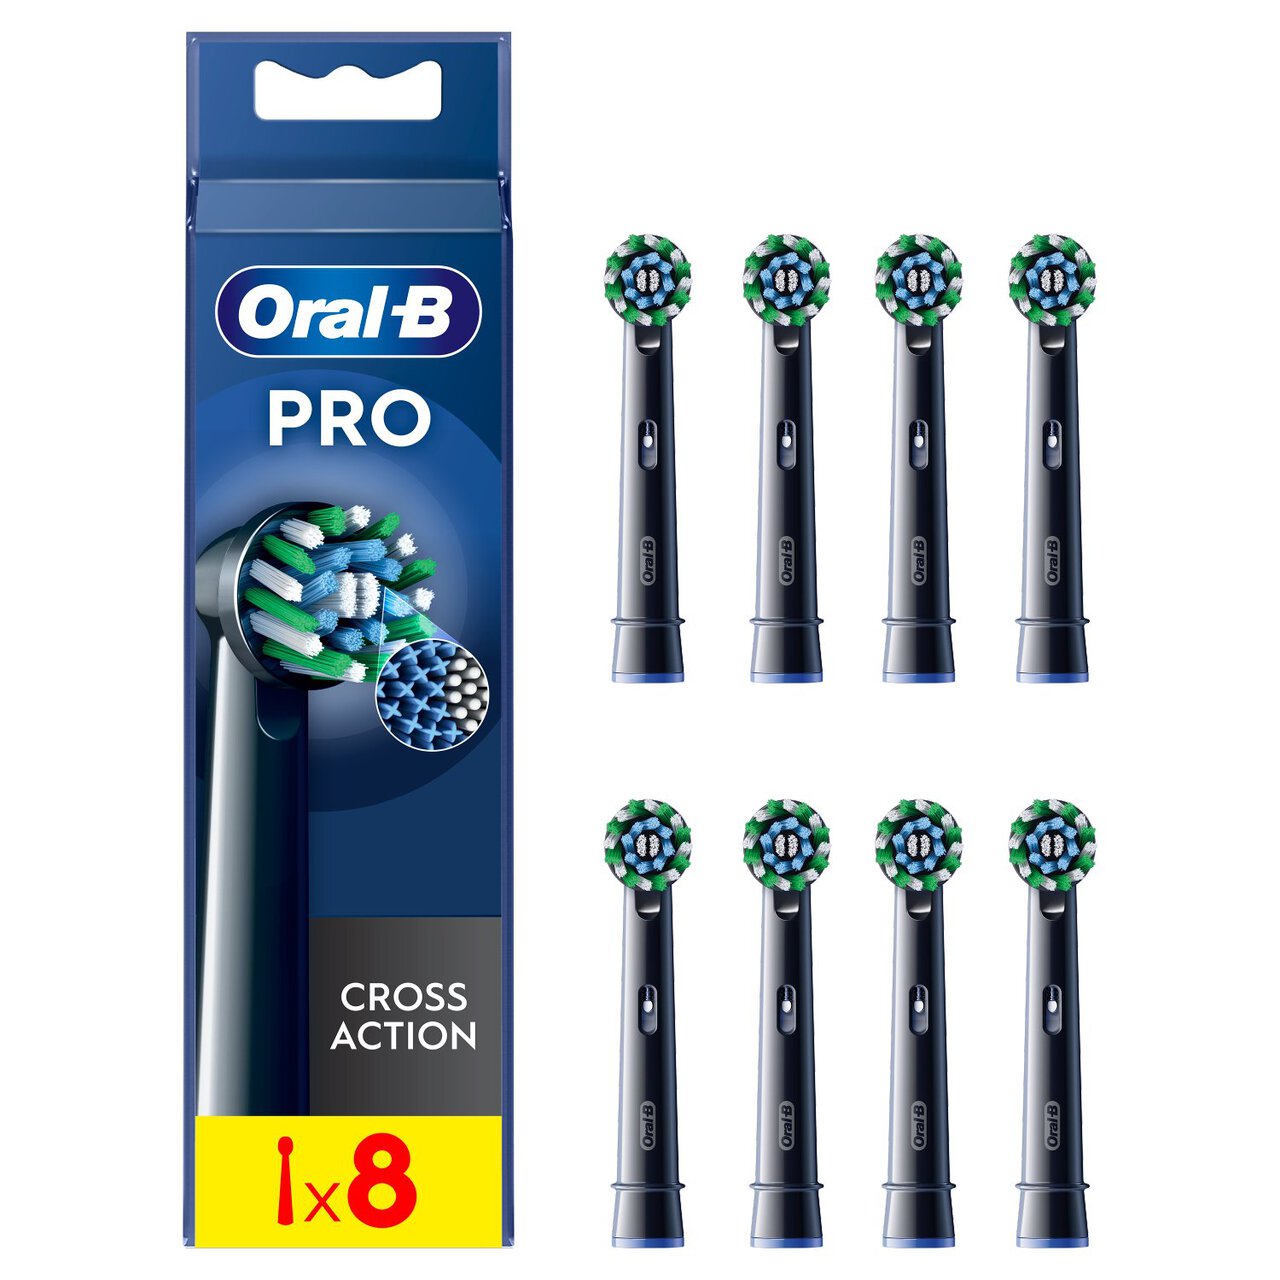 Oral-B CrossAction Toothbrush Heads - Black 8 per pack